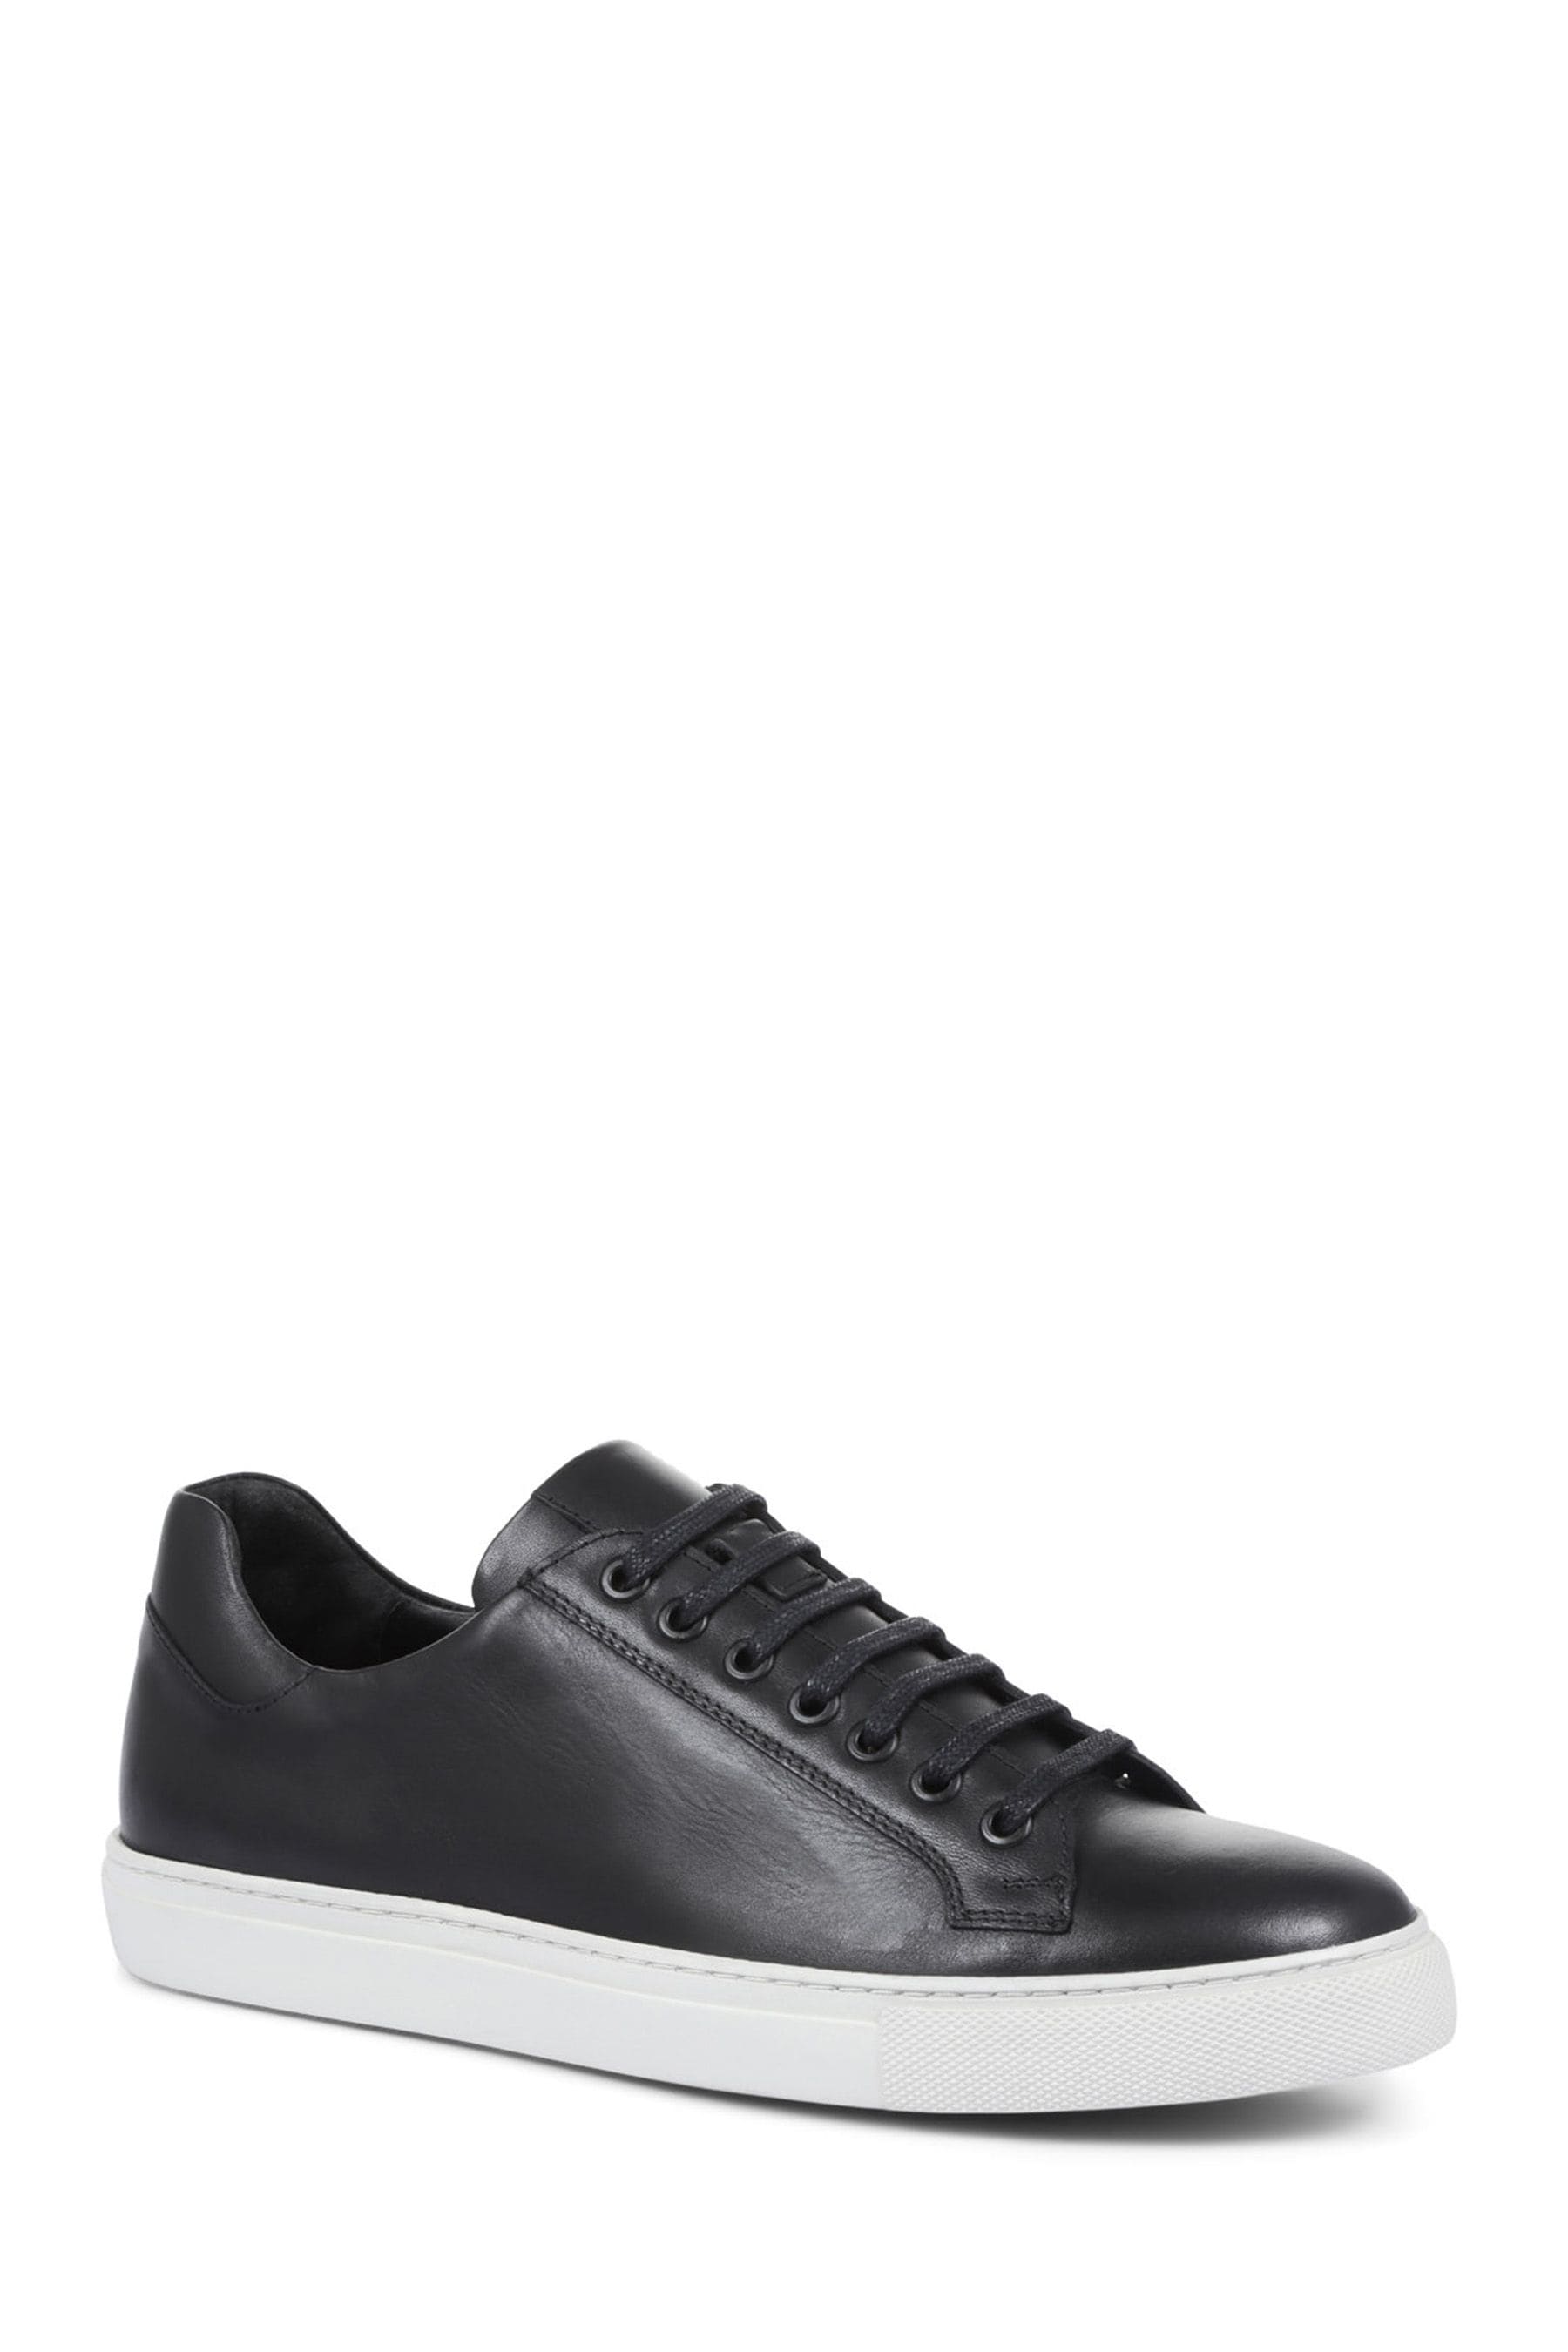 Buy Jones Bootmaker Simon Leather Trainers from the Next UK online shop